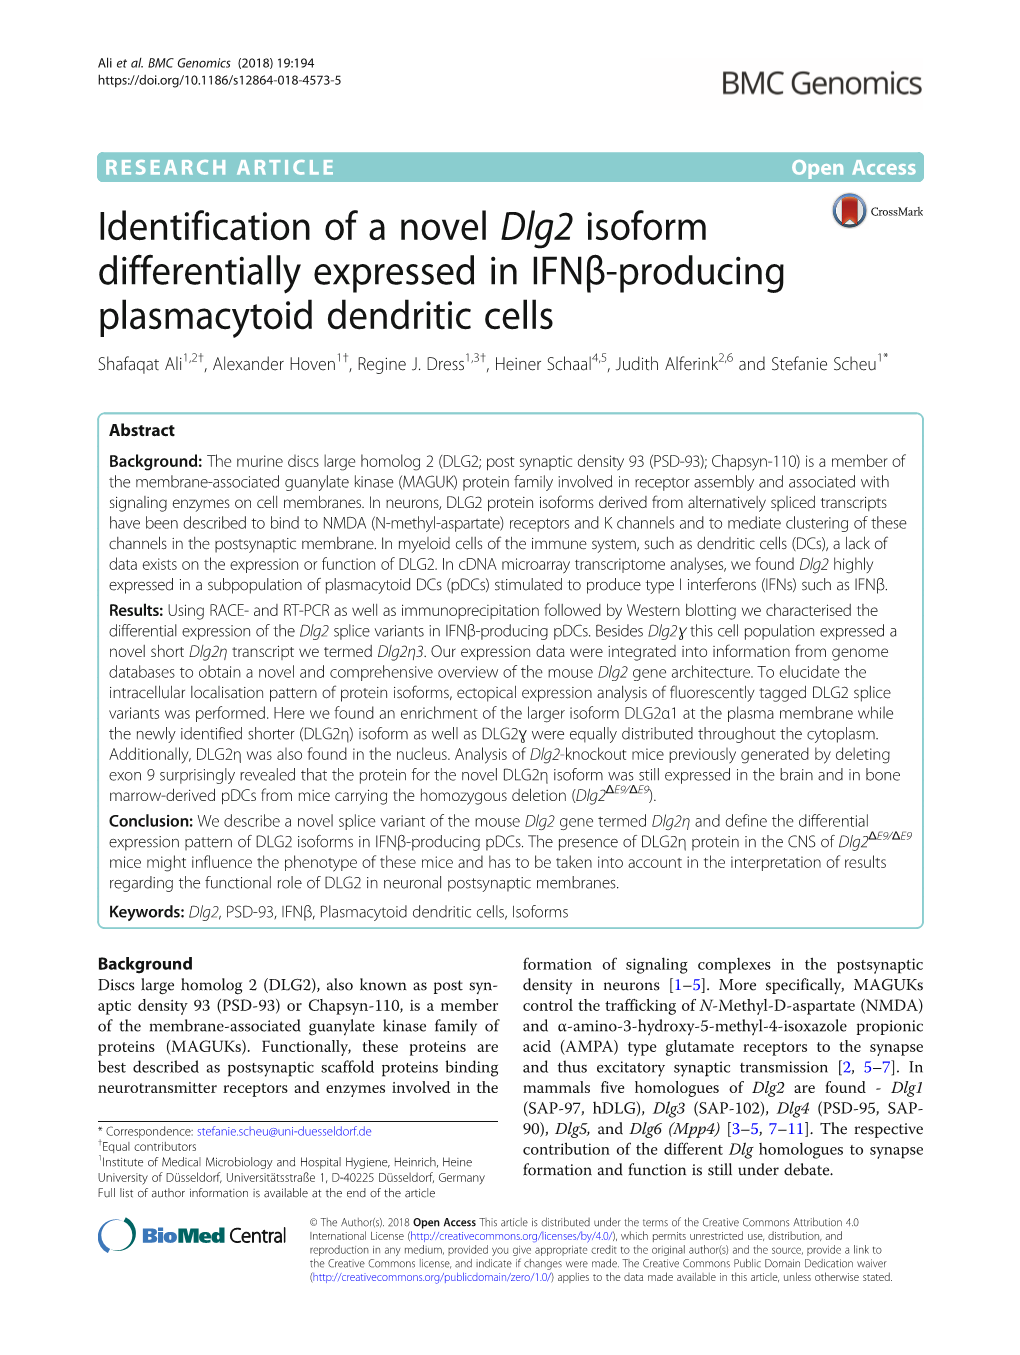 Identification of a Novel Dlg2 Isoform Differentially Expressed in Ifnβ-Producing Plasmacytoid Dendritic Cells Shafaqat Ali1,2†, Alexander Hoven1†, Regine J